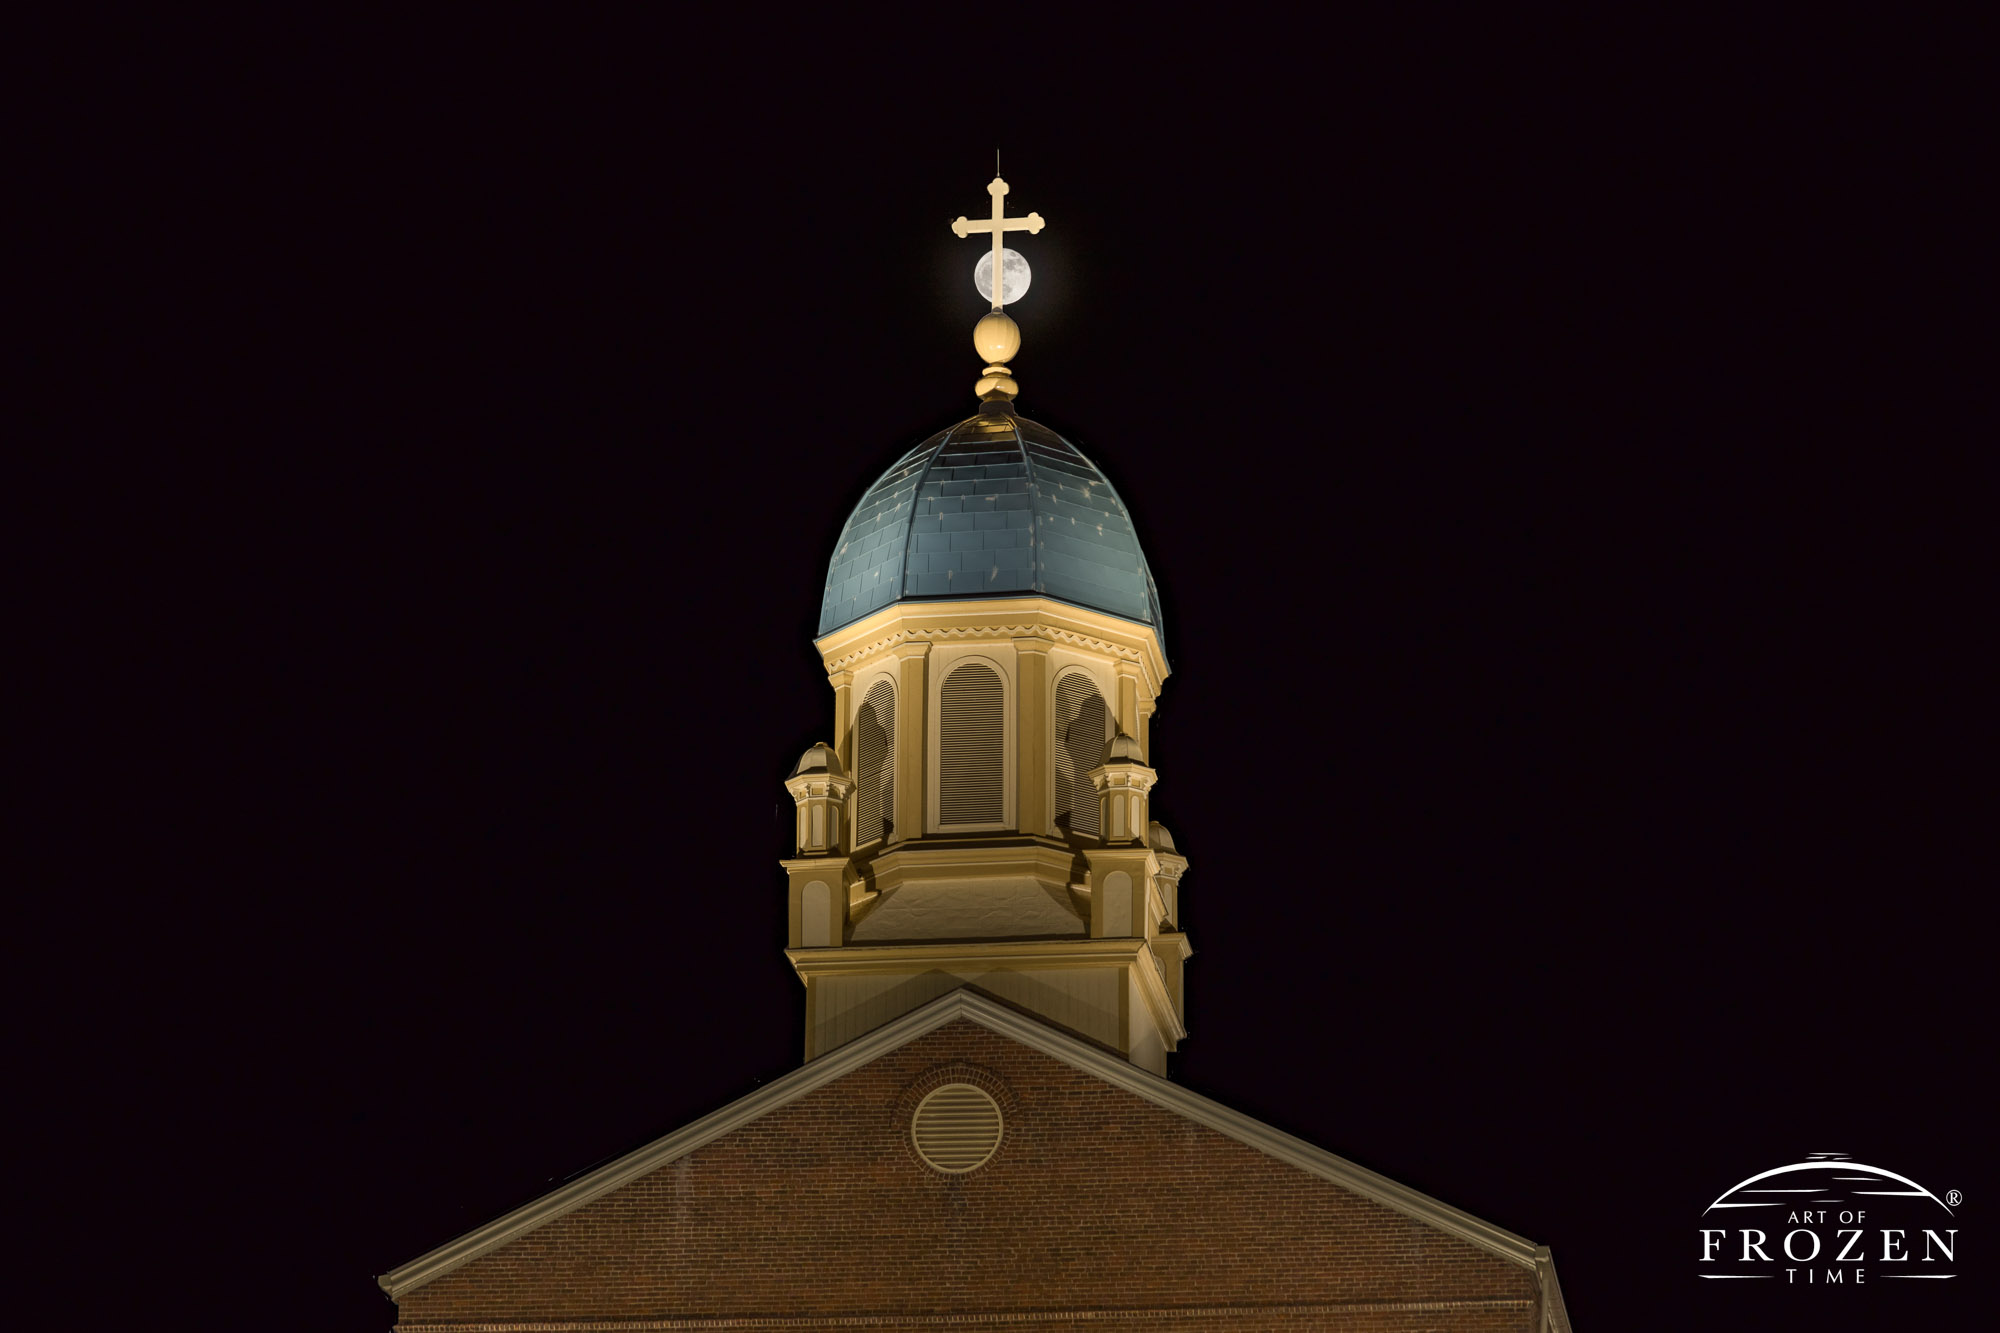 An intimate view of a moonrise over University of Dayton Chapel of the Immaculate Conception where the bell tower's crucifix stands in front of the moon